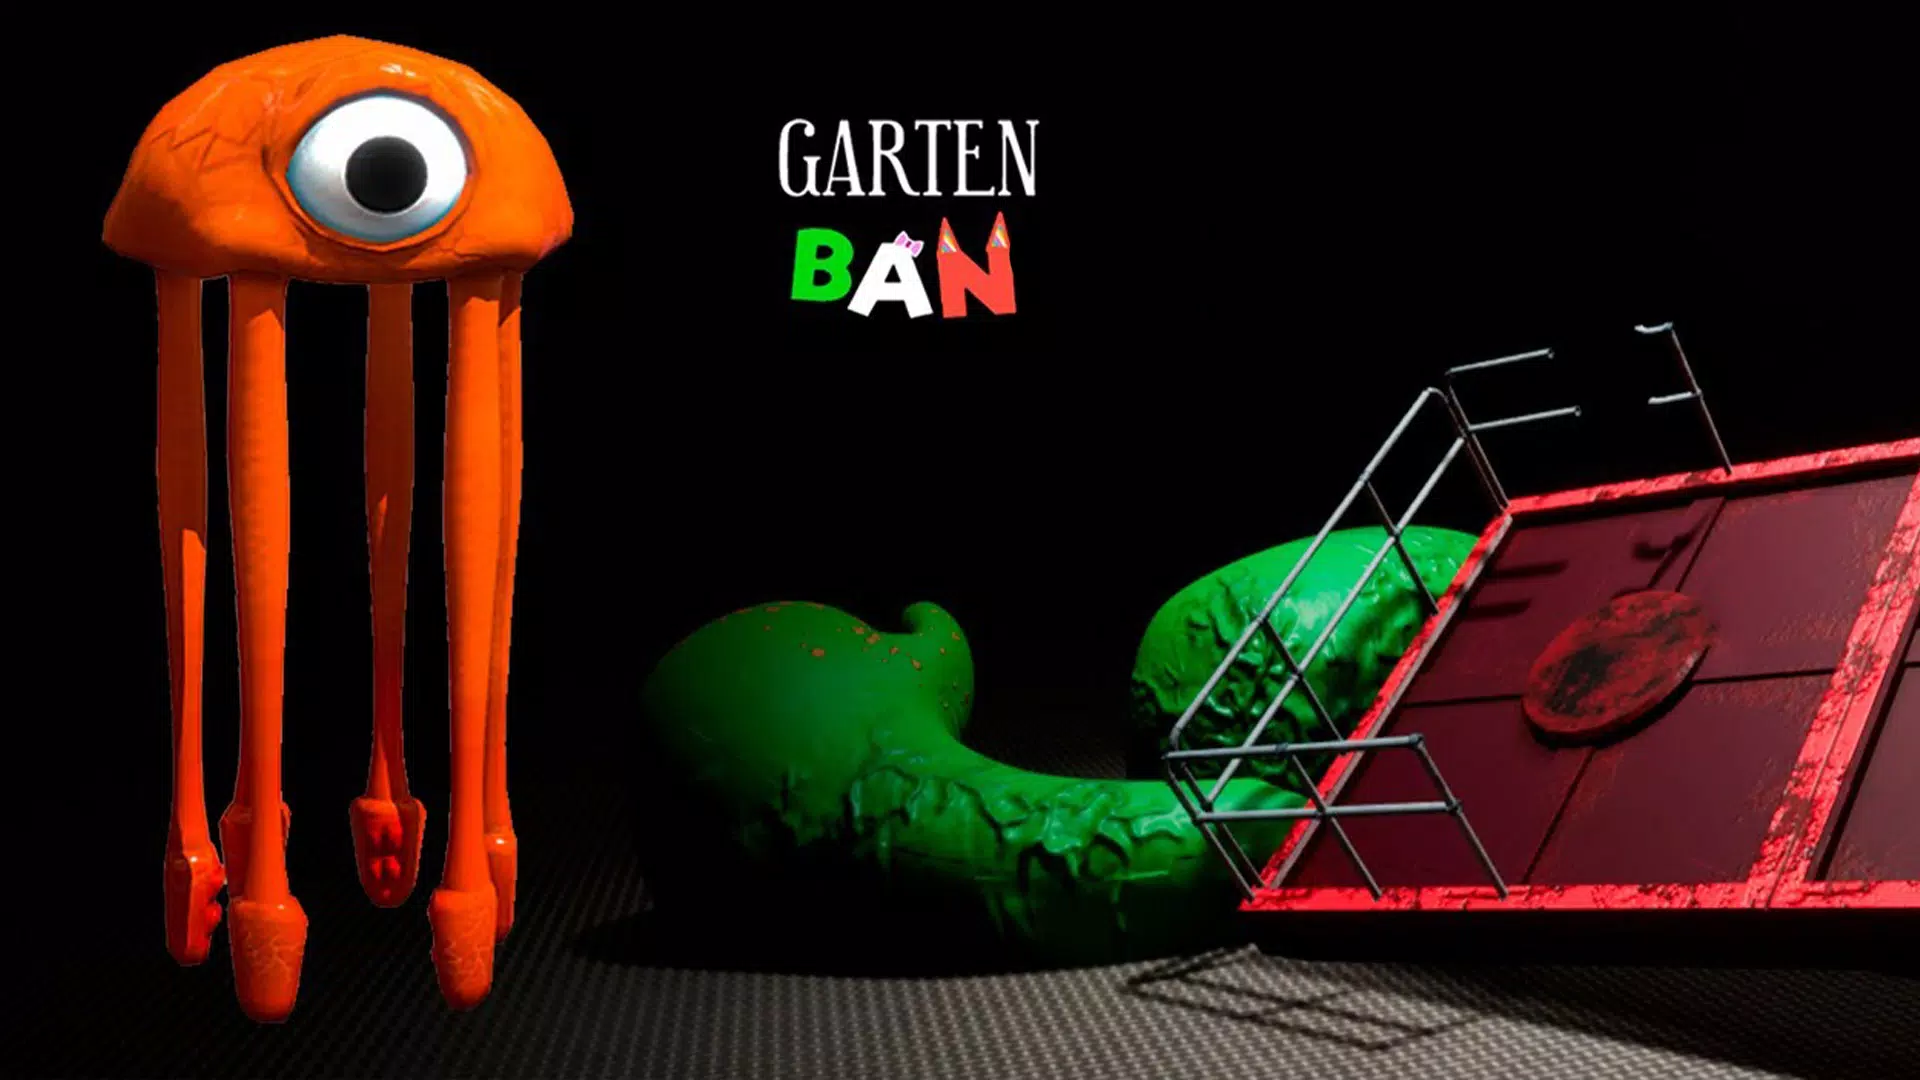 Garten of banban 3- Companion for Android - Download